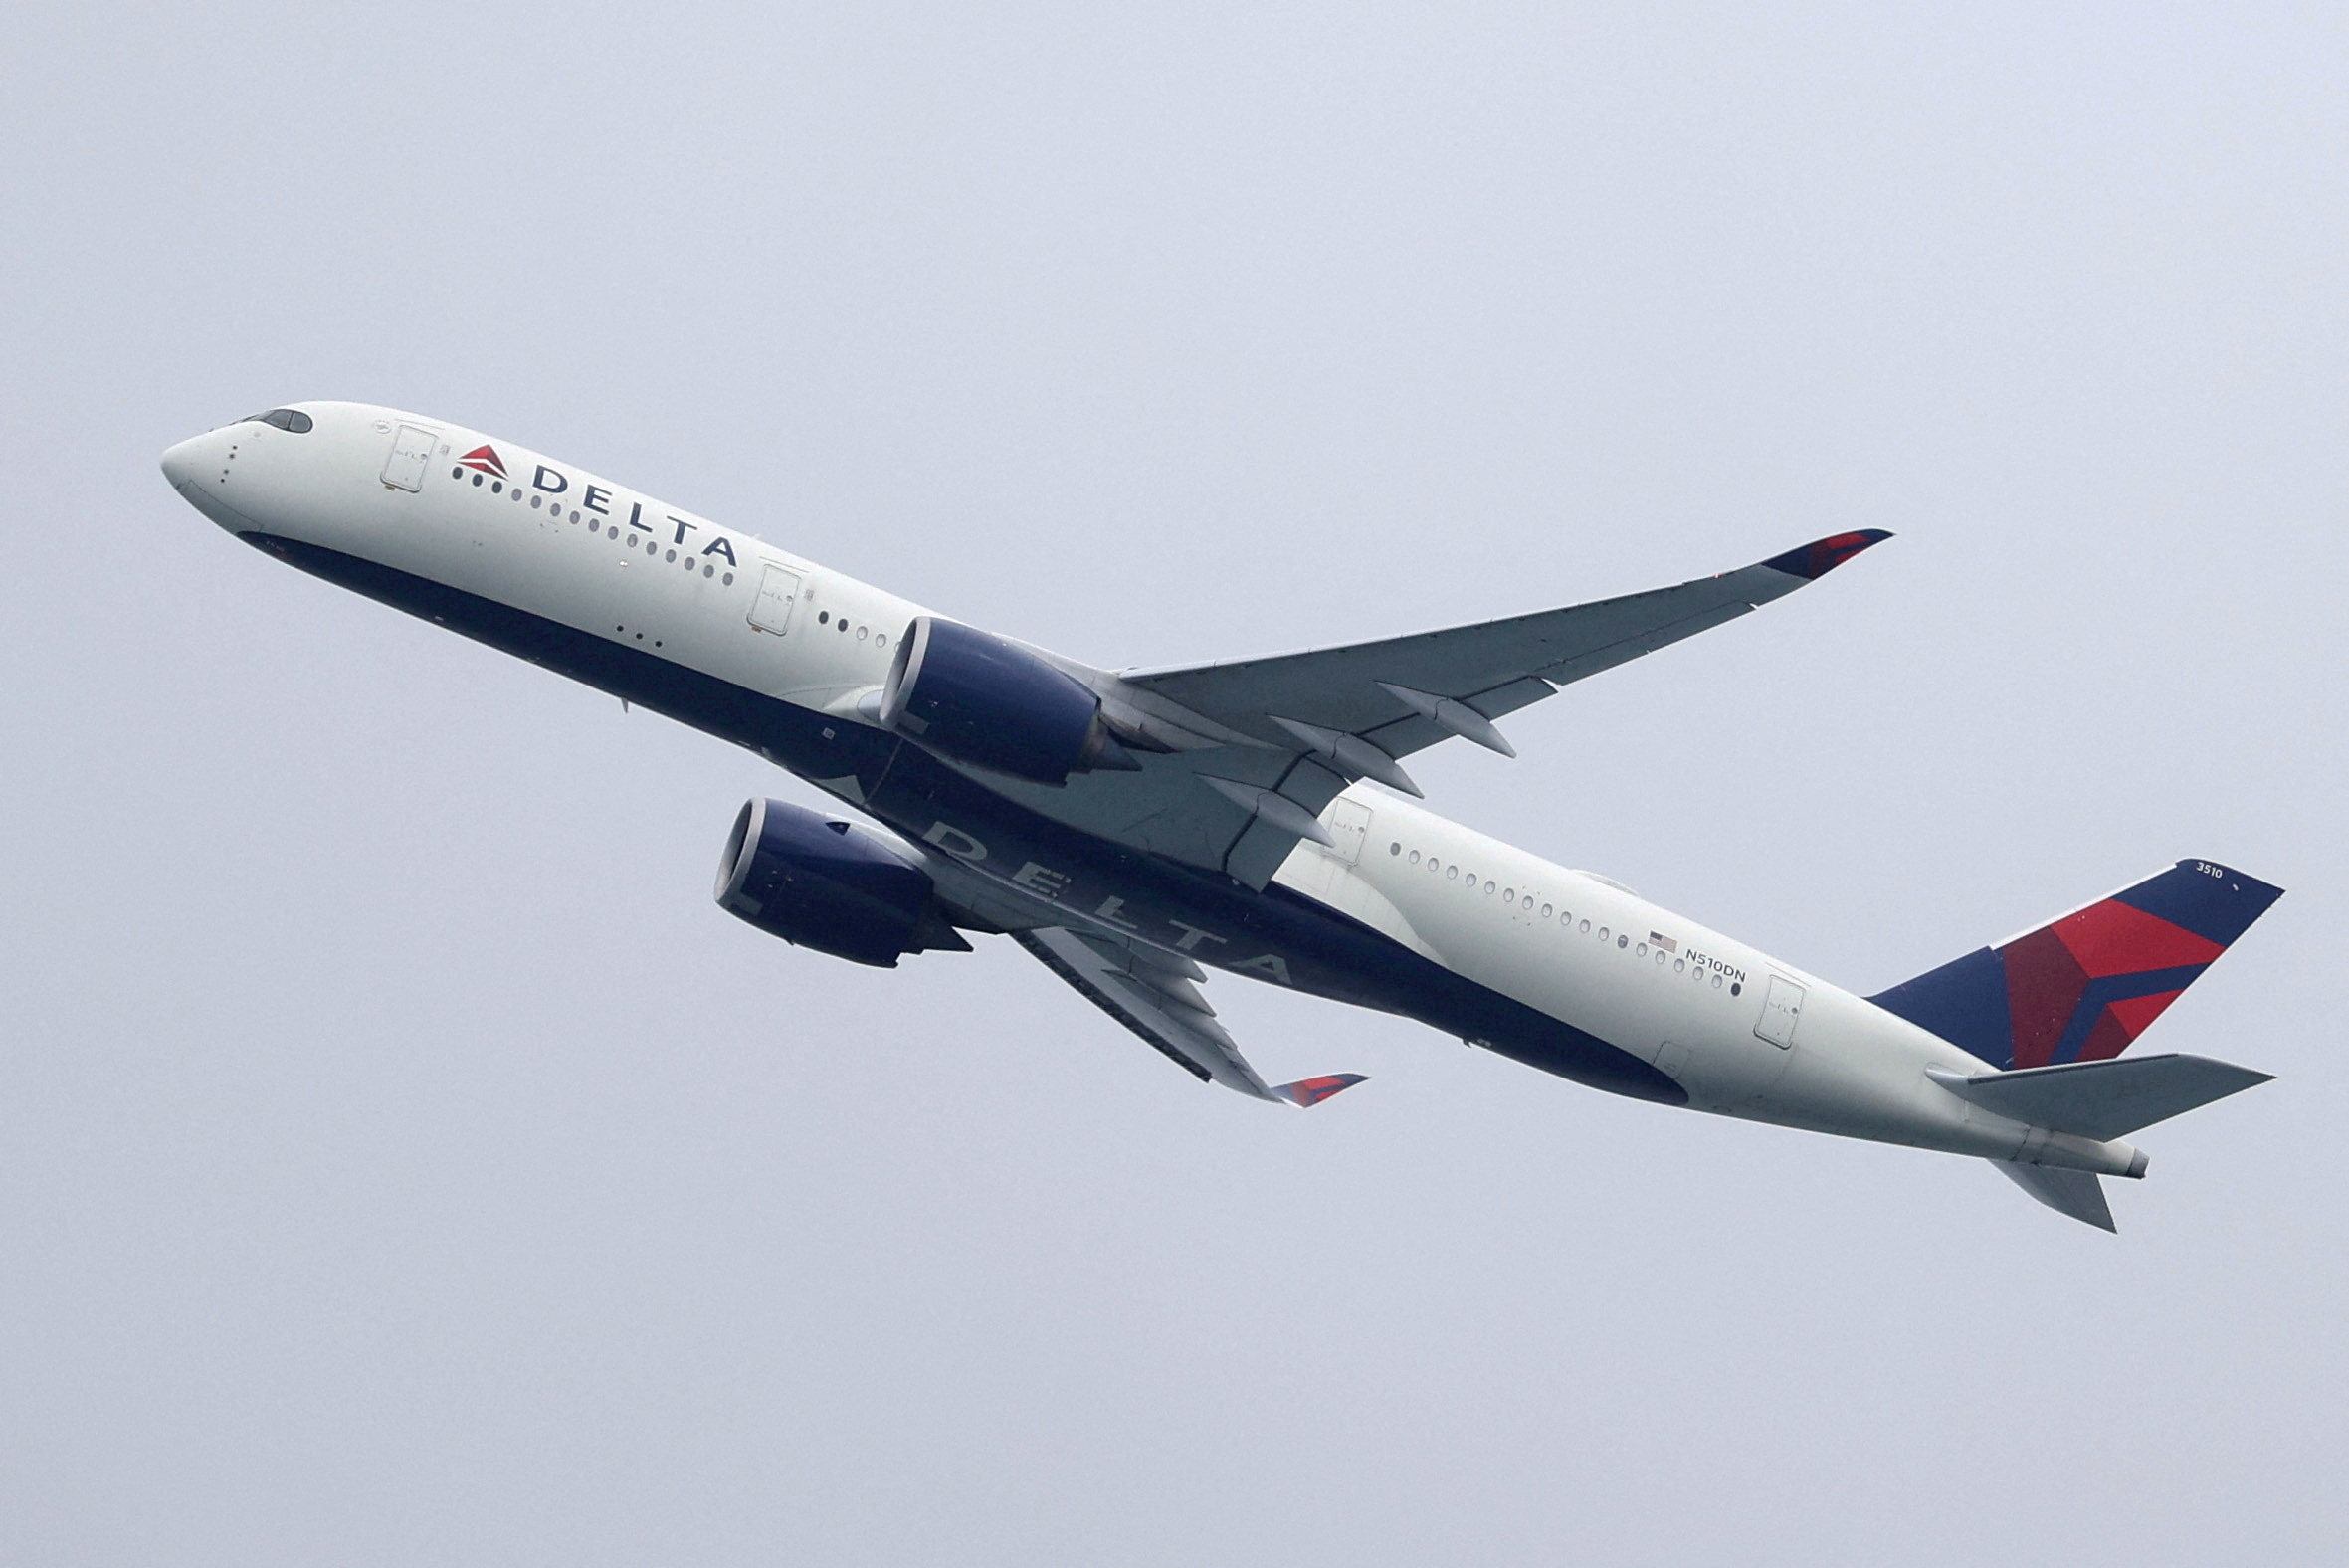 A Delta Air Lines plane takes off from Sydney Airport in Sydney